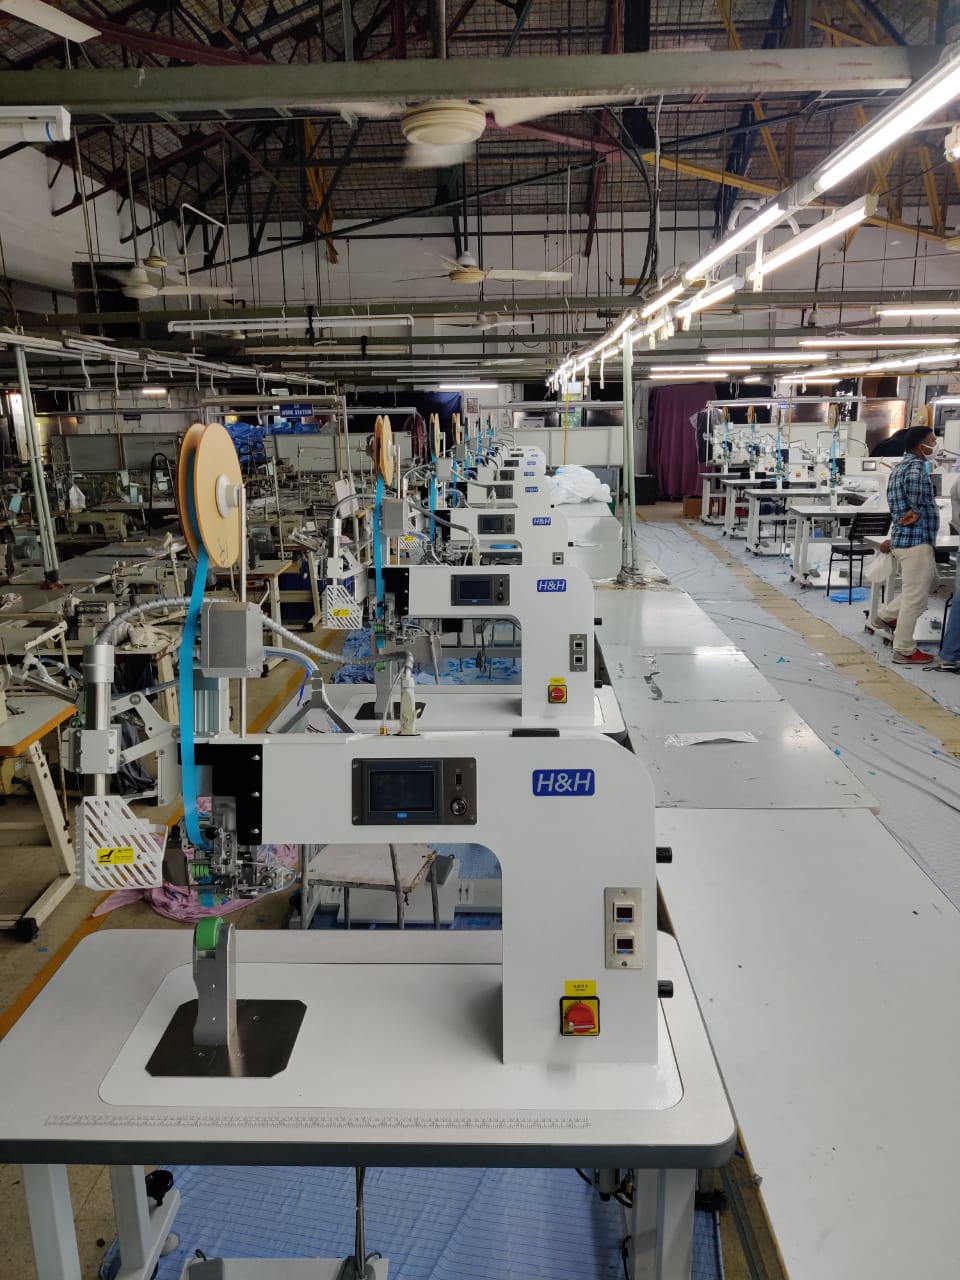 Vedanta enables mass production of Personal Protective Equipment (PPEs) in Gurugram